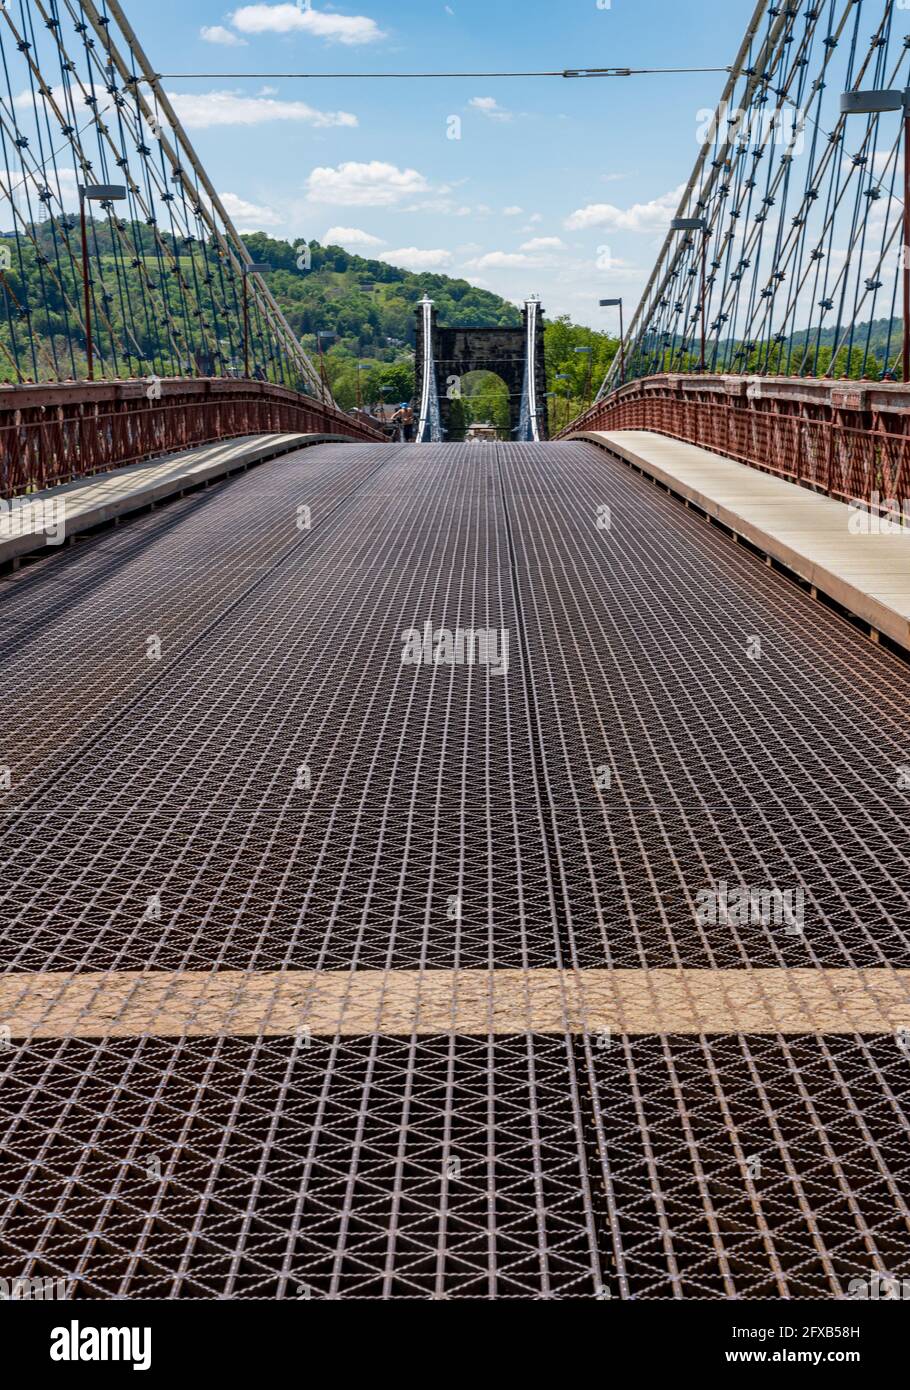 Metal structure of the old suspension bridge carrying the National Road across the Ohio river in Wheeling West Virginia Stock Photo